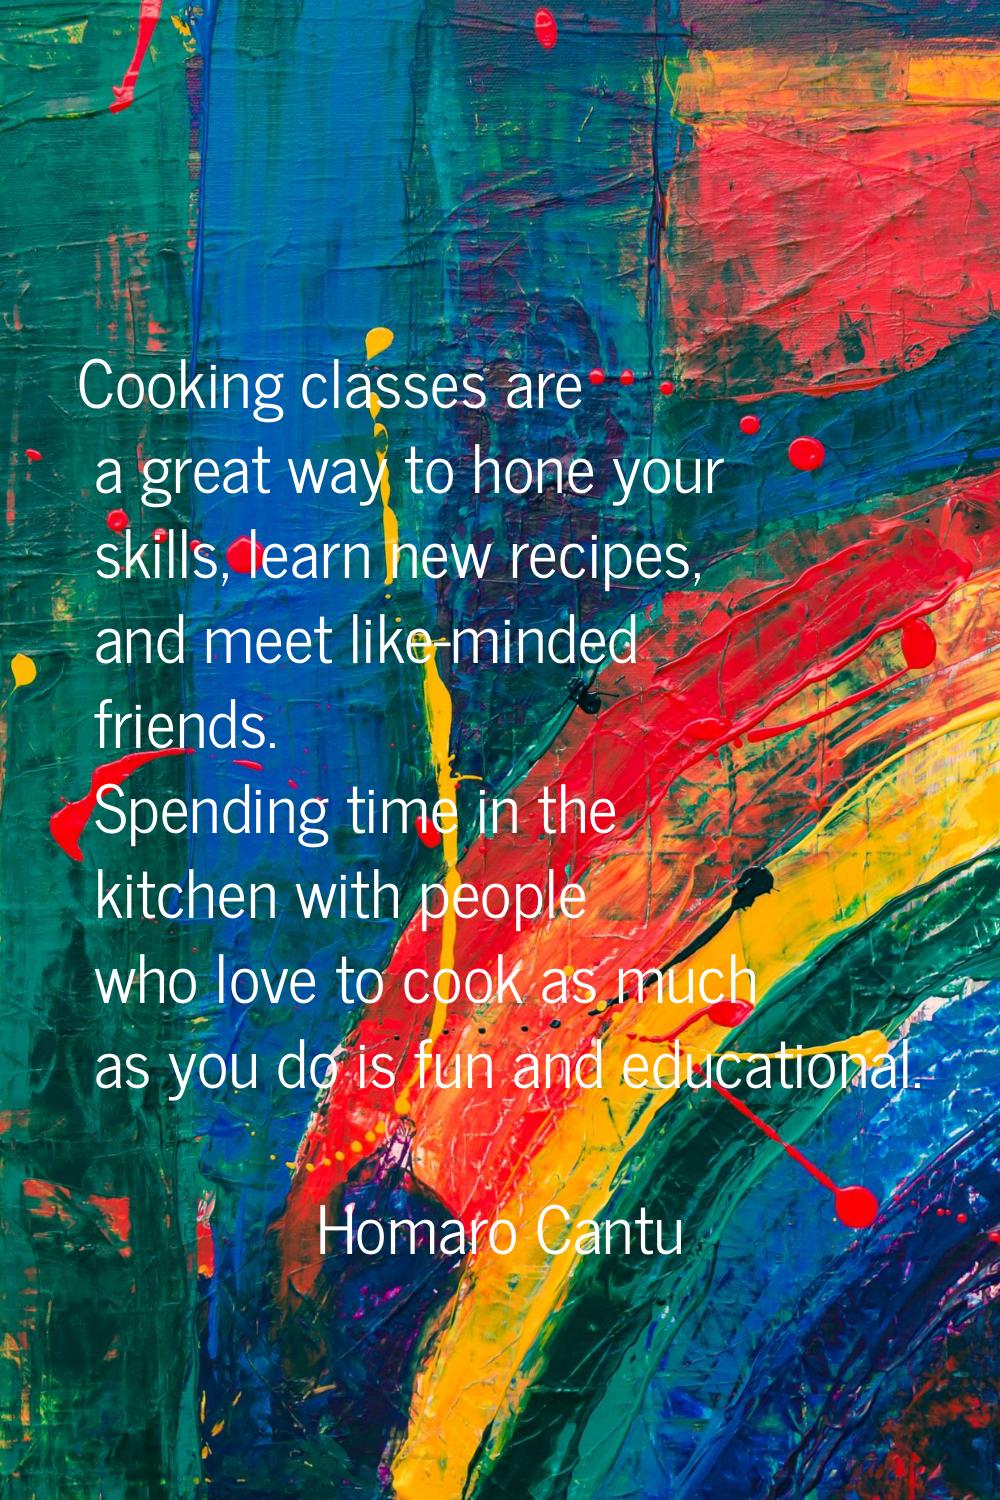 Cooking classes are a great way to hone your skills, learn new recipes, and meet like-minded friend